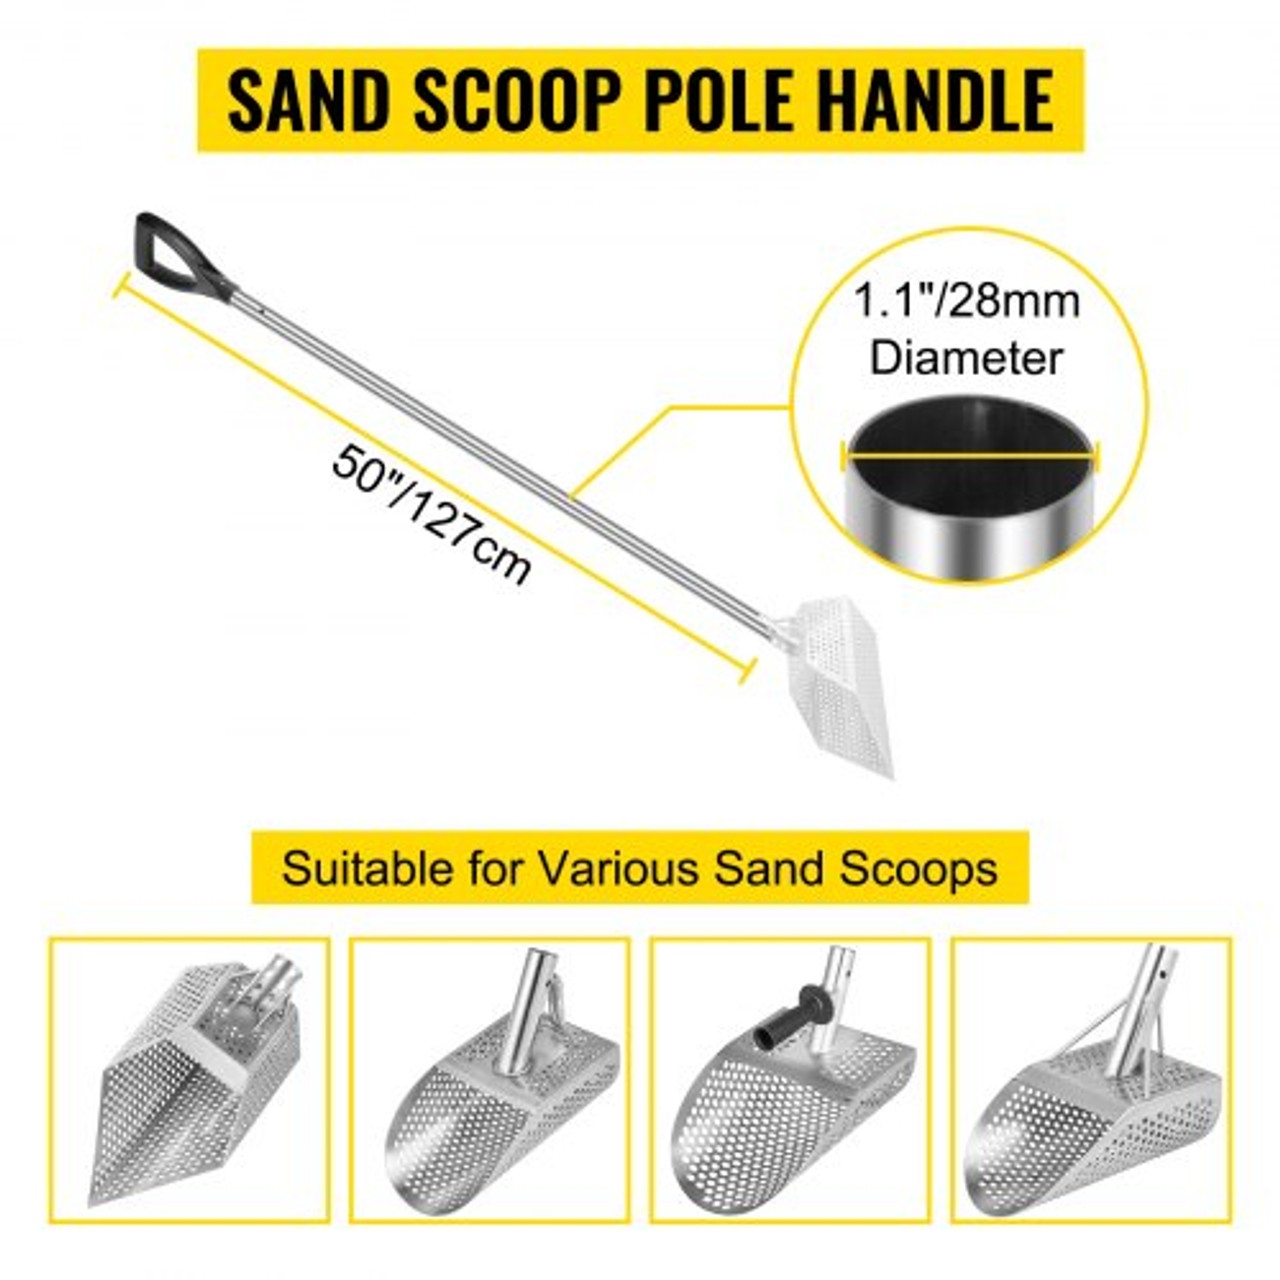 Sand Scoop Pole Handle, Stainless Steel Sand Scoop Long Pole, Travel Light Sturdy Metal Scoop Shovel Handle, Metal Detector Tool with 28mm/1.1" Diameter, for Metal Detecting and Treasure Hunting